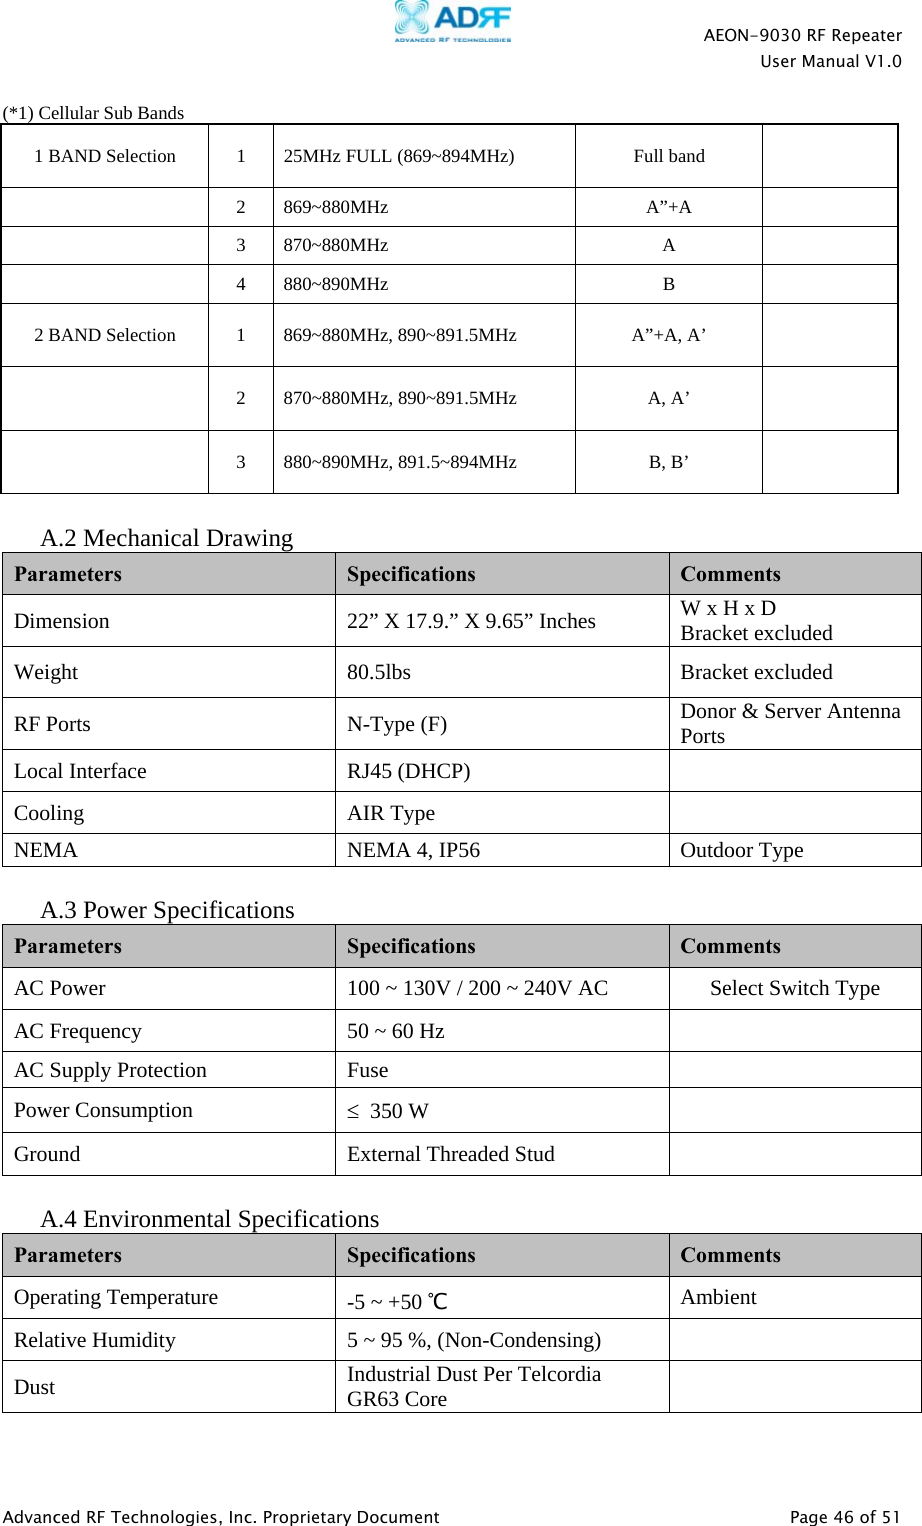    AEON-9030 RF Repeater  User Manual V1.0  Advanced RF Technologies, Inc. Proprietary Document   Page 46 of 51  (*1) Cellular Sub Bands 1 BAND Selection  1  25MHz FULL (869~894MHz)  Full band      2 869~880MHz  A”+A      3 870~880MHz  A      4 880~890MHz  B    2 BAND Selection  1  869~880MHz, 890~891.5MHz  A”+A, A’       2  870~880MHz, 890~891.5MHz  A, A’       3  880~890MHz, 891.5~894MHz  B, B’     A.2 Mechanical Drawing Parameters  Specifications  Comments Dimension  22” X 17.9.” X 9.65” Inches  W x H x D Bracket excluded Weight 80.5lbs Bracket excluded RF Ports  N-Type (F)  Donor &amp; Server Antenna Ports Local Interface  RJ45 (DHCP)   Cooling AIR Type  NEMA  NEMA 4, IP56 Outdoor Type  A.3 Power Specifications Parameters  Specifications  Comments AC Power  100 ~ 130V / 200 ~ 240V AC  Select Switch Type AC Frequency  50 ~ 60 Hz   AC Supply Protection  Fuse   Power Consumption    350 W   Ground  External Threaded Stud    A.4 Environmental Specifications Parameters  Specifications  Comments Operating Temperature  -5 ~ +50 ℃ Ambient Relative Humidity  5 ~ 95 %, (Non-Condensing)  Dust  Industrial Dust Per Telcordia GR63 Core  